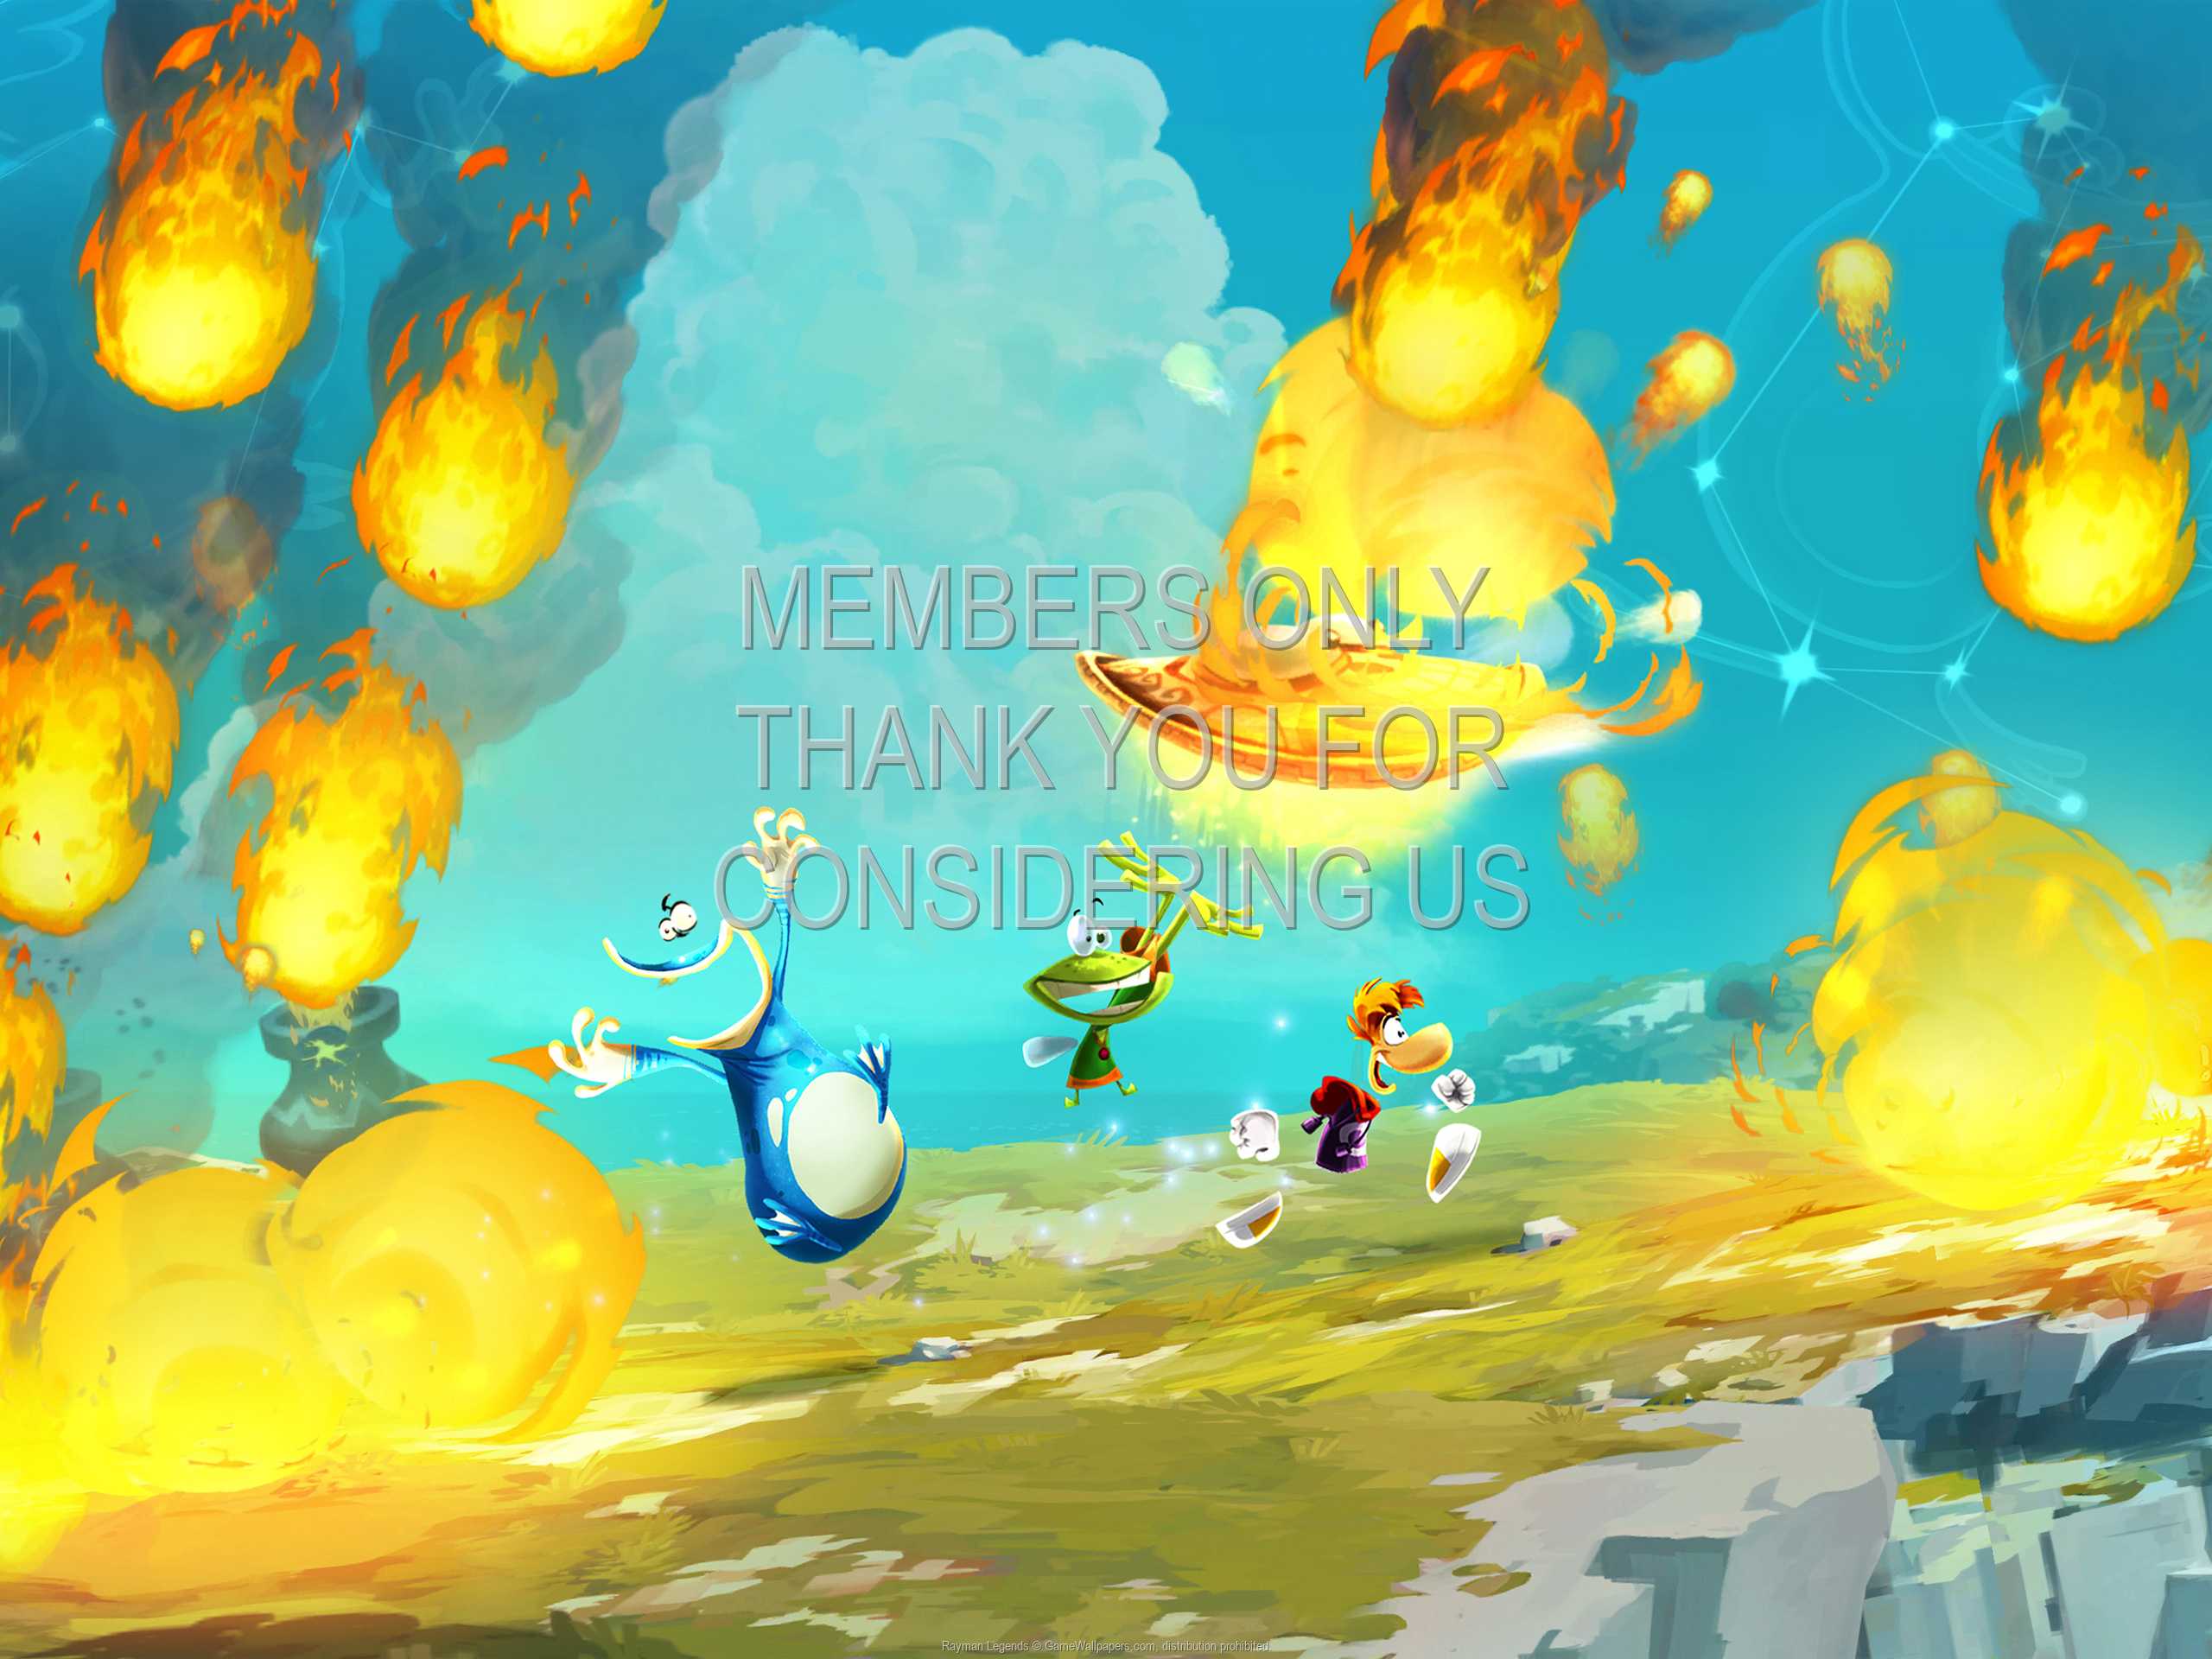 Rayman Legends 1080p%20Horizontal Mobile wallpaper or background 04